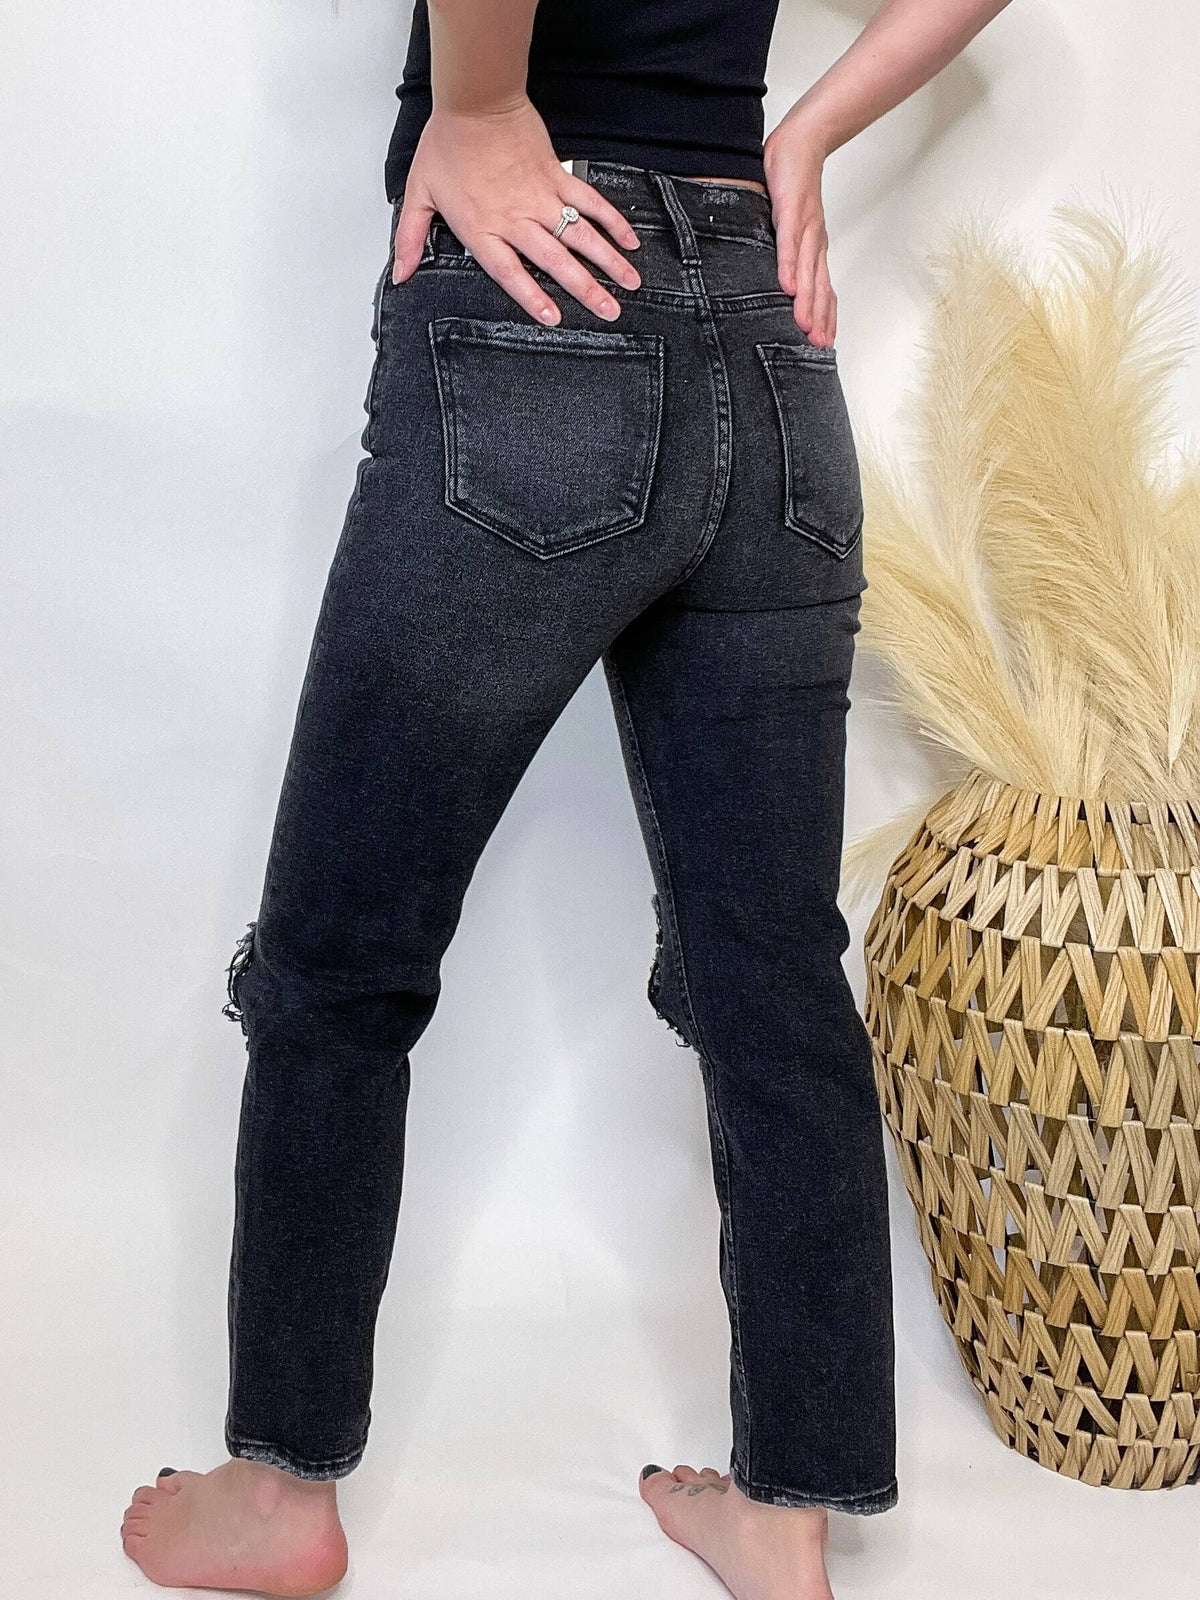 Vintage Black  High Rise KanCan Jeans Comfort Stretch Distressed Straight Leg Jeans True to Size 99% Cotton, 1% Spandex 10.5" Rise, 27" Inseam